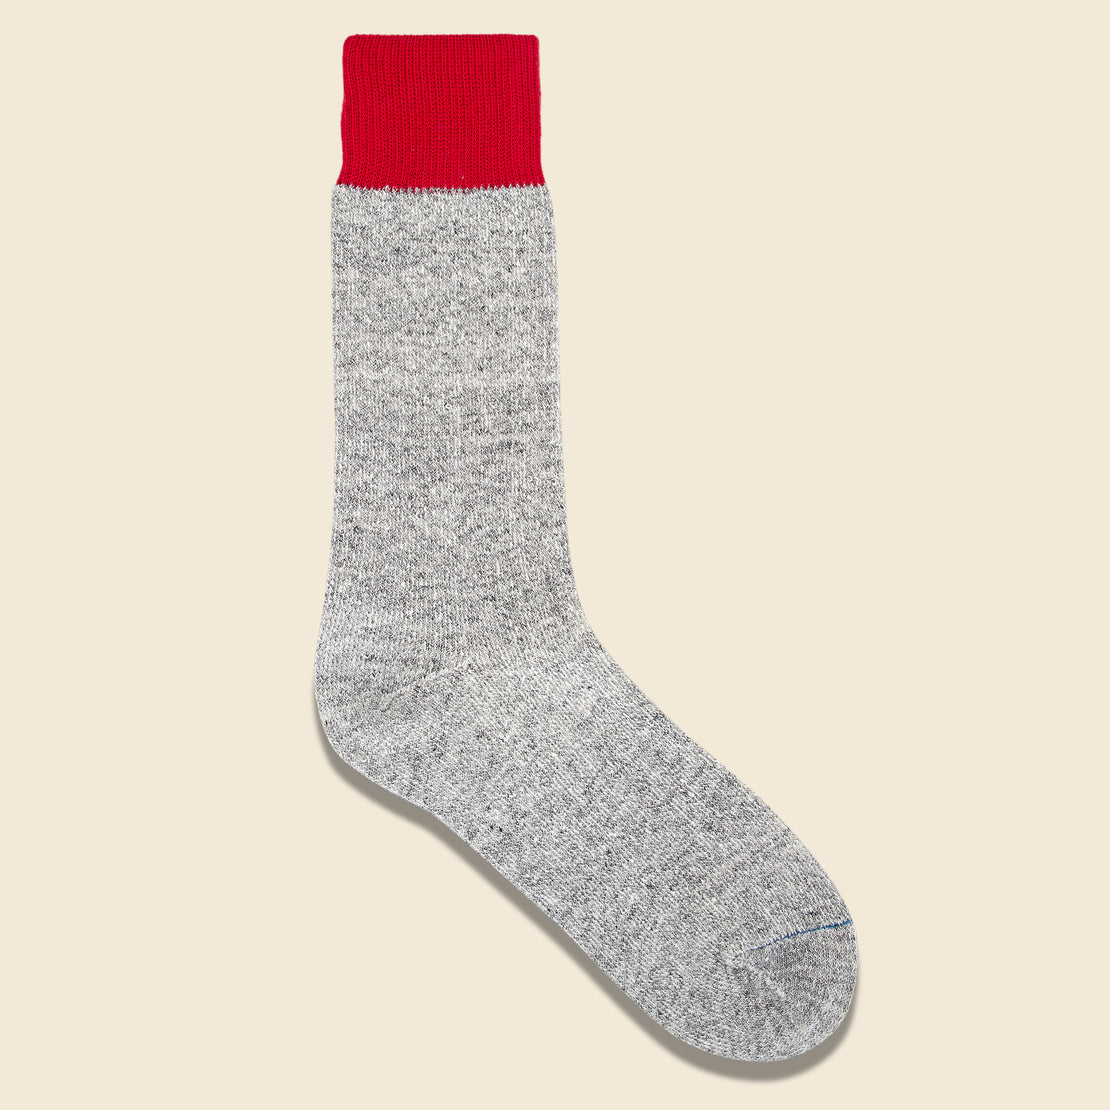 RoToTo Silk & Cotton Double Face Sock - Red/Light Gray